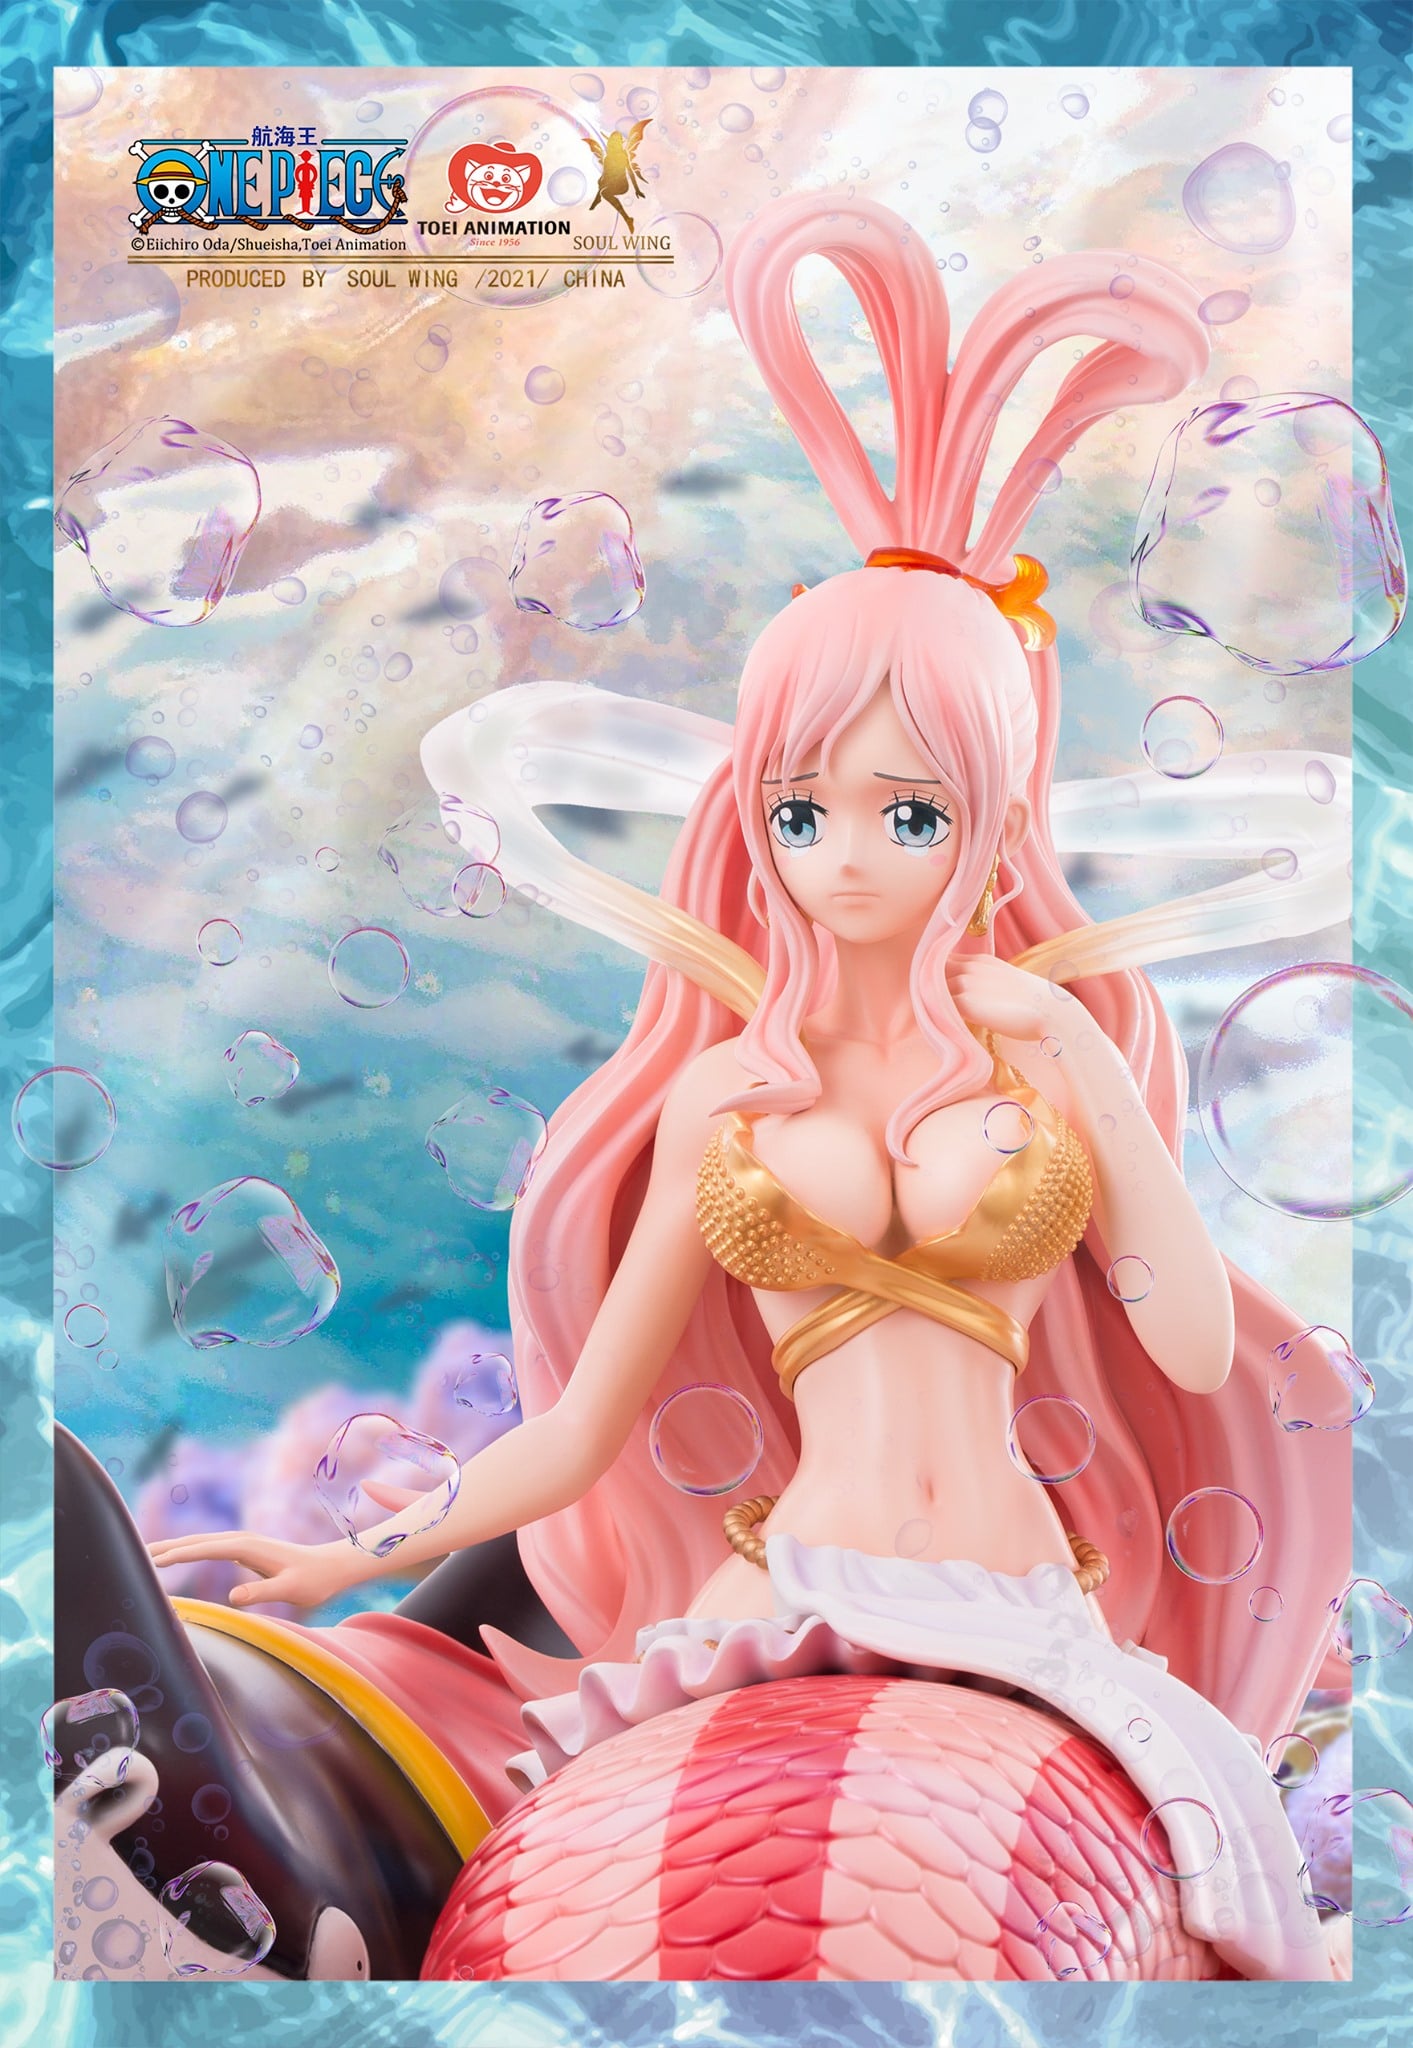 Soul Wing Shirahoshi with Megalo Statue